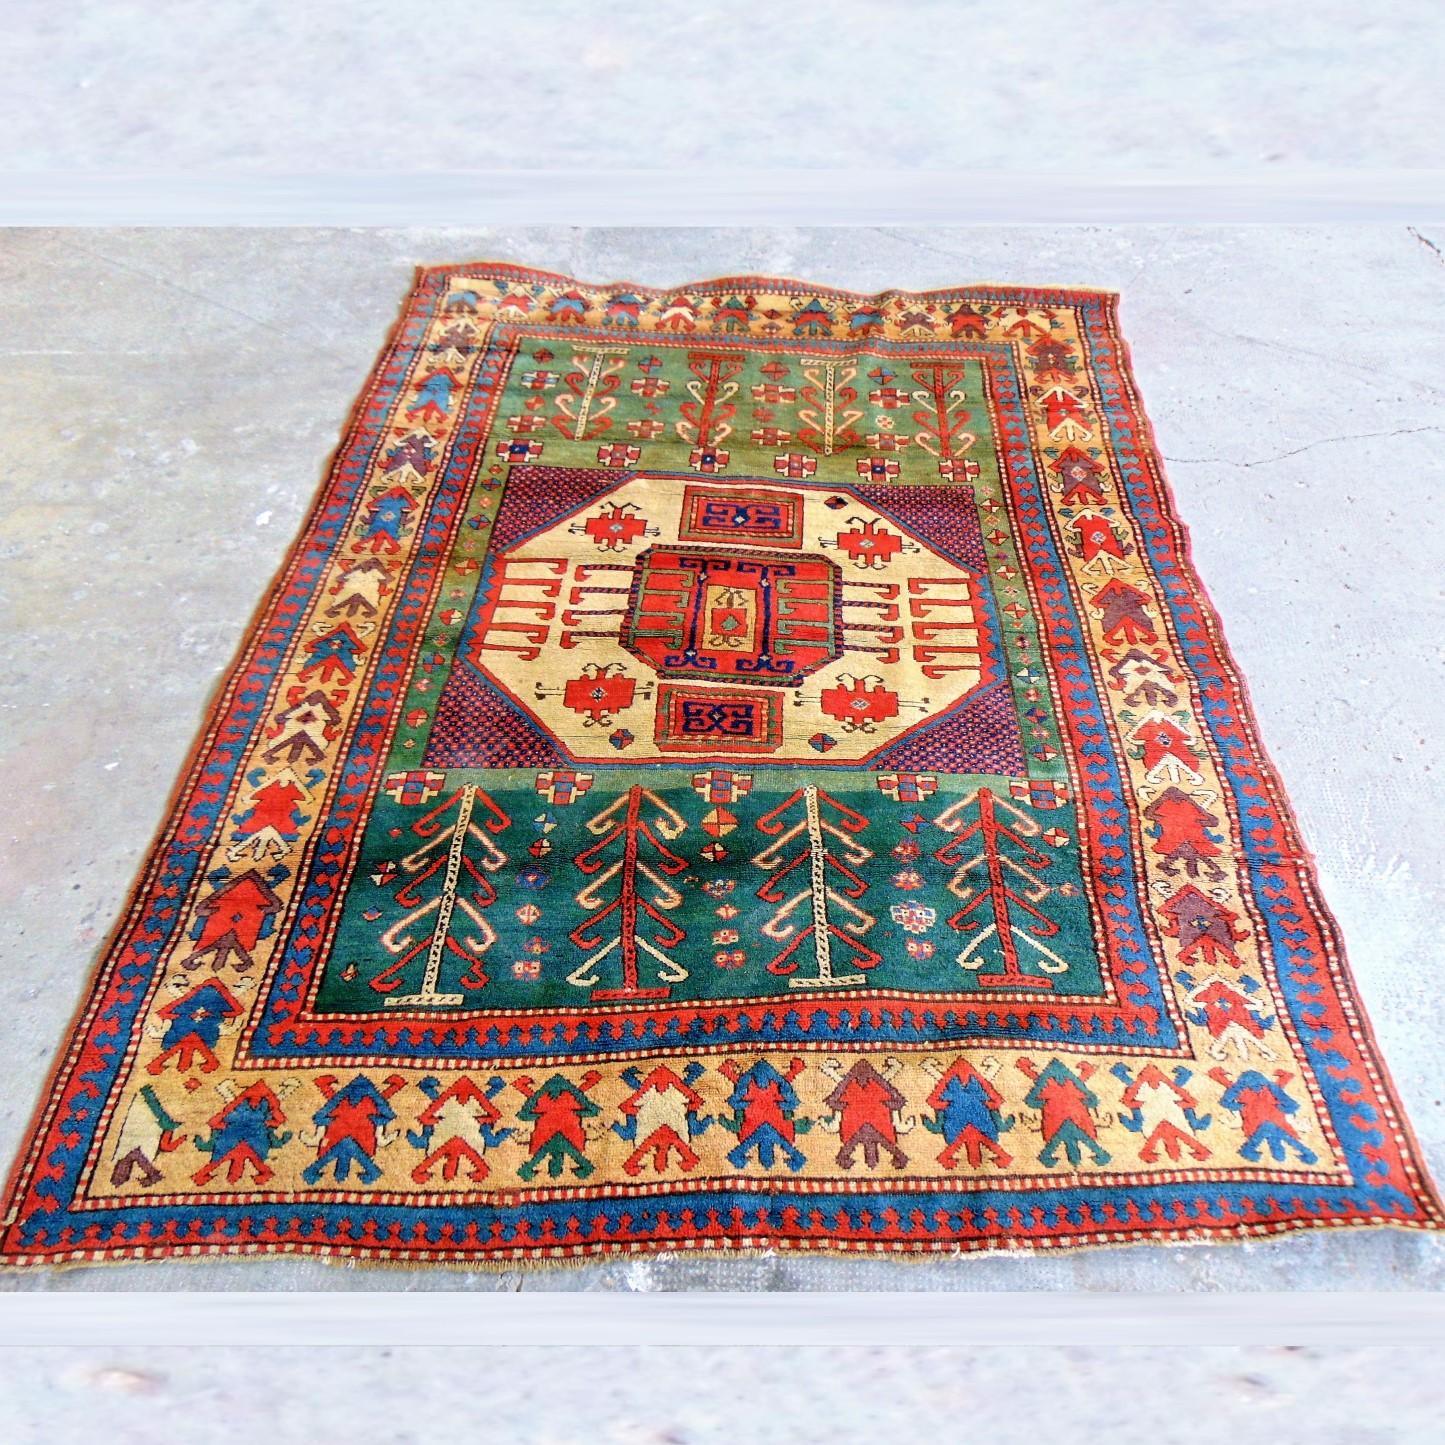 Hand-Knotted 19th Century Antique Large Kazak Karachopf Rug, Handknotted Green Blue Red Beige For Sale